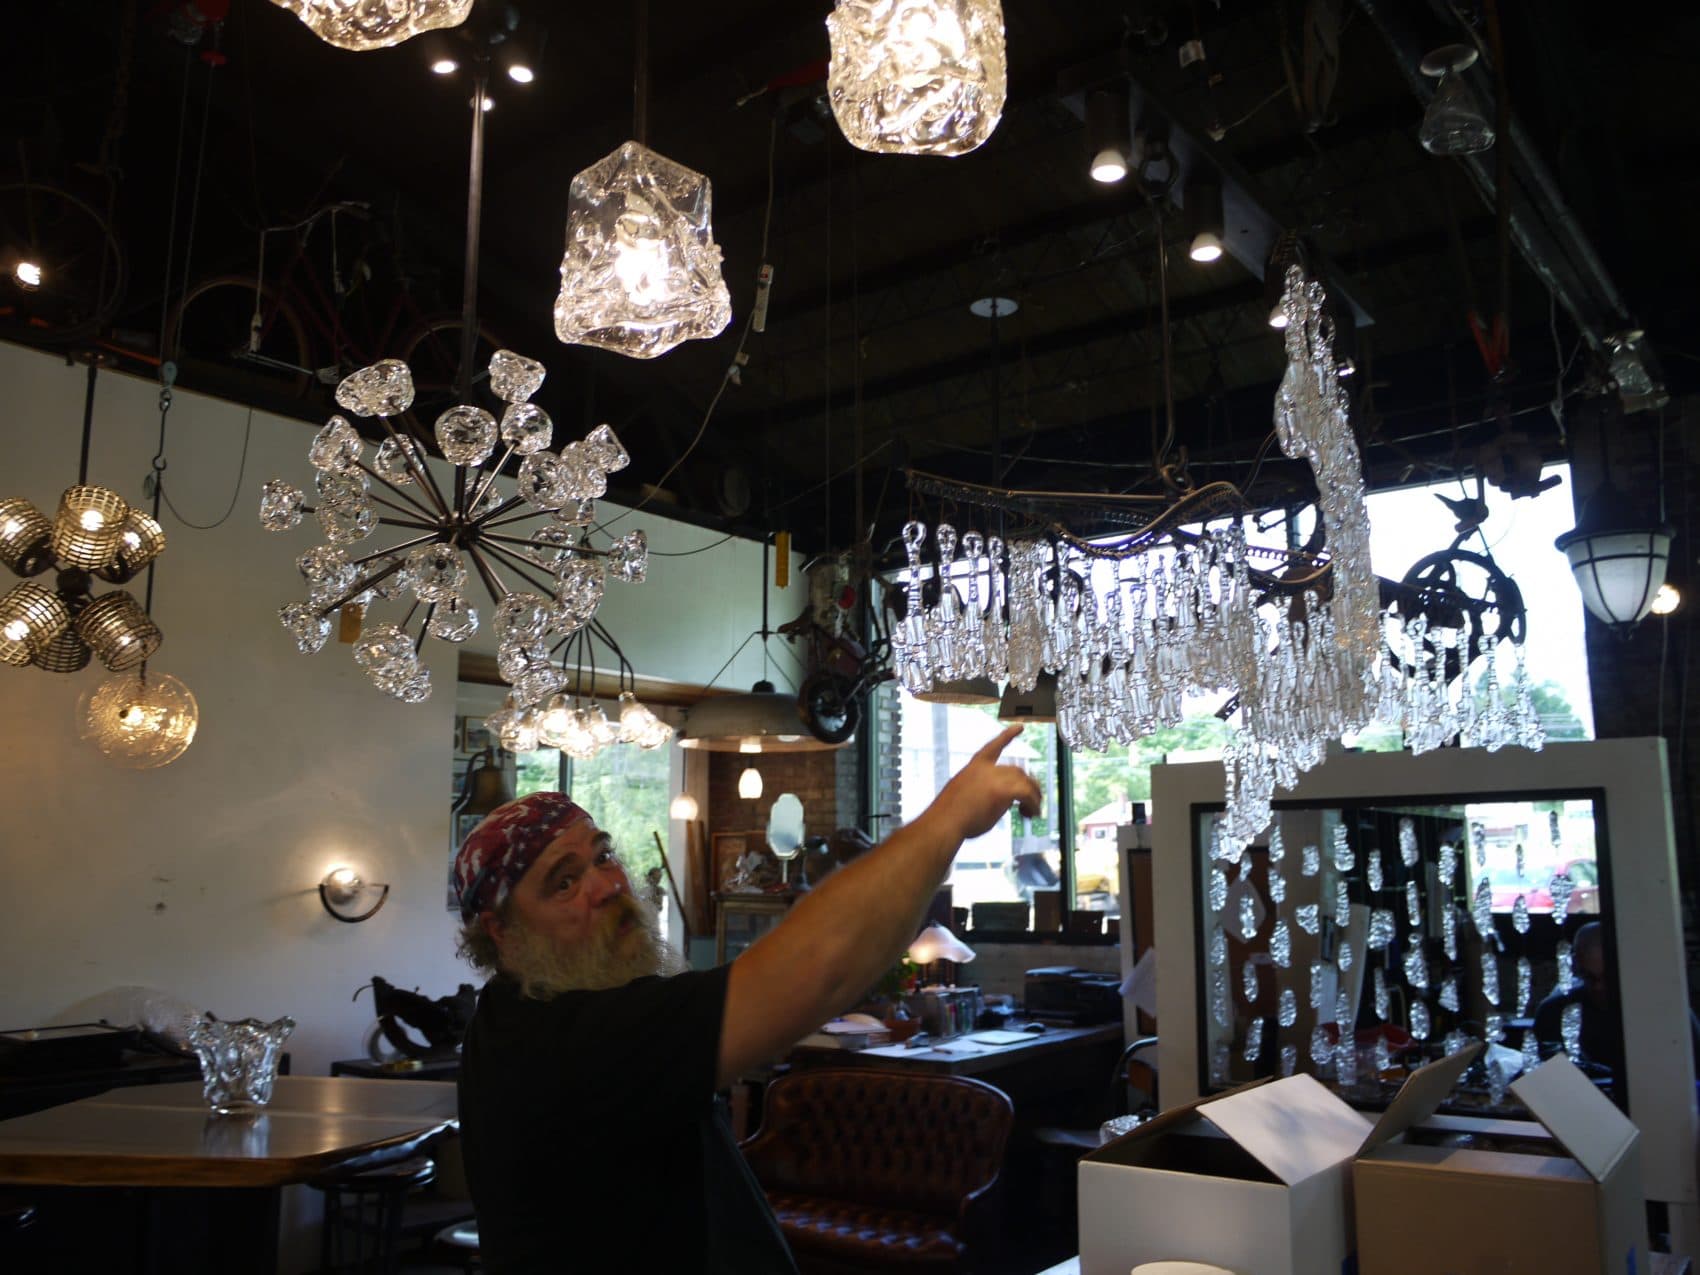 Cleveland Art manager Bart Hanick shows chandeliers to Here &amp; Now producer Alex Ashlock. (Alex Ashlock/Here &amp; Now)